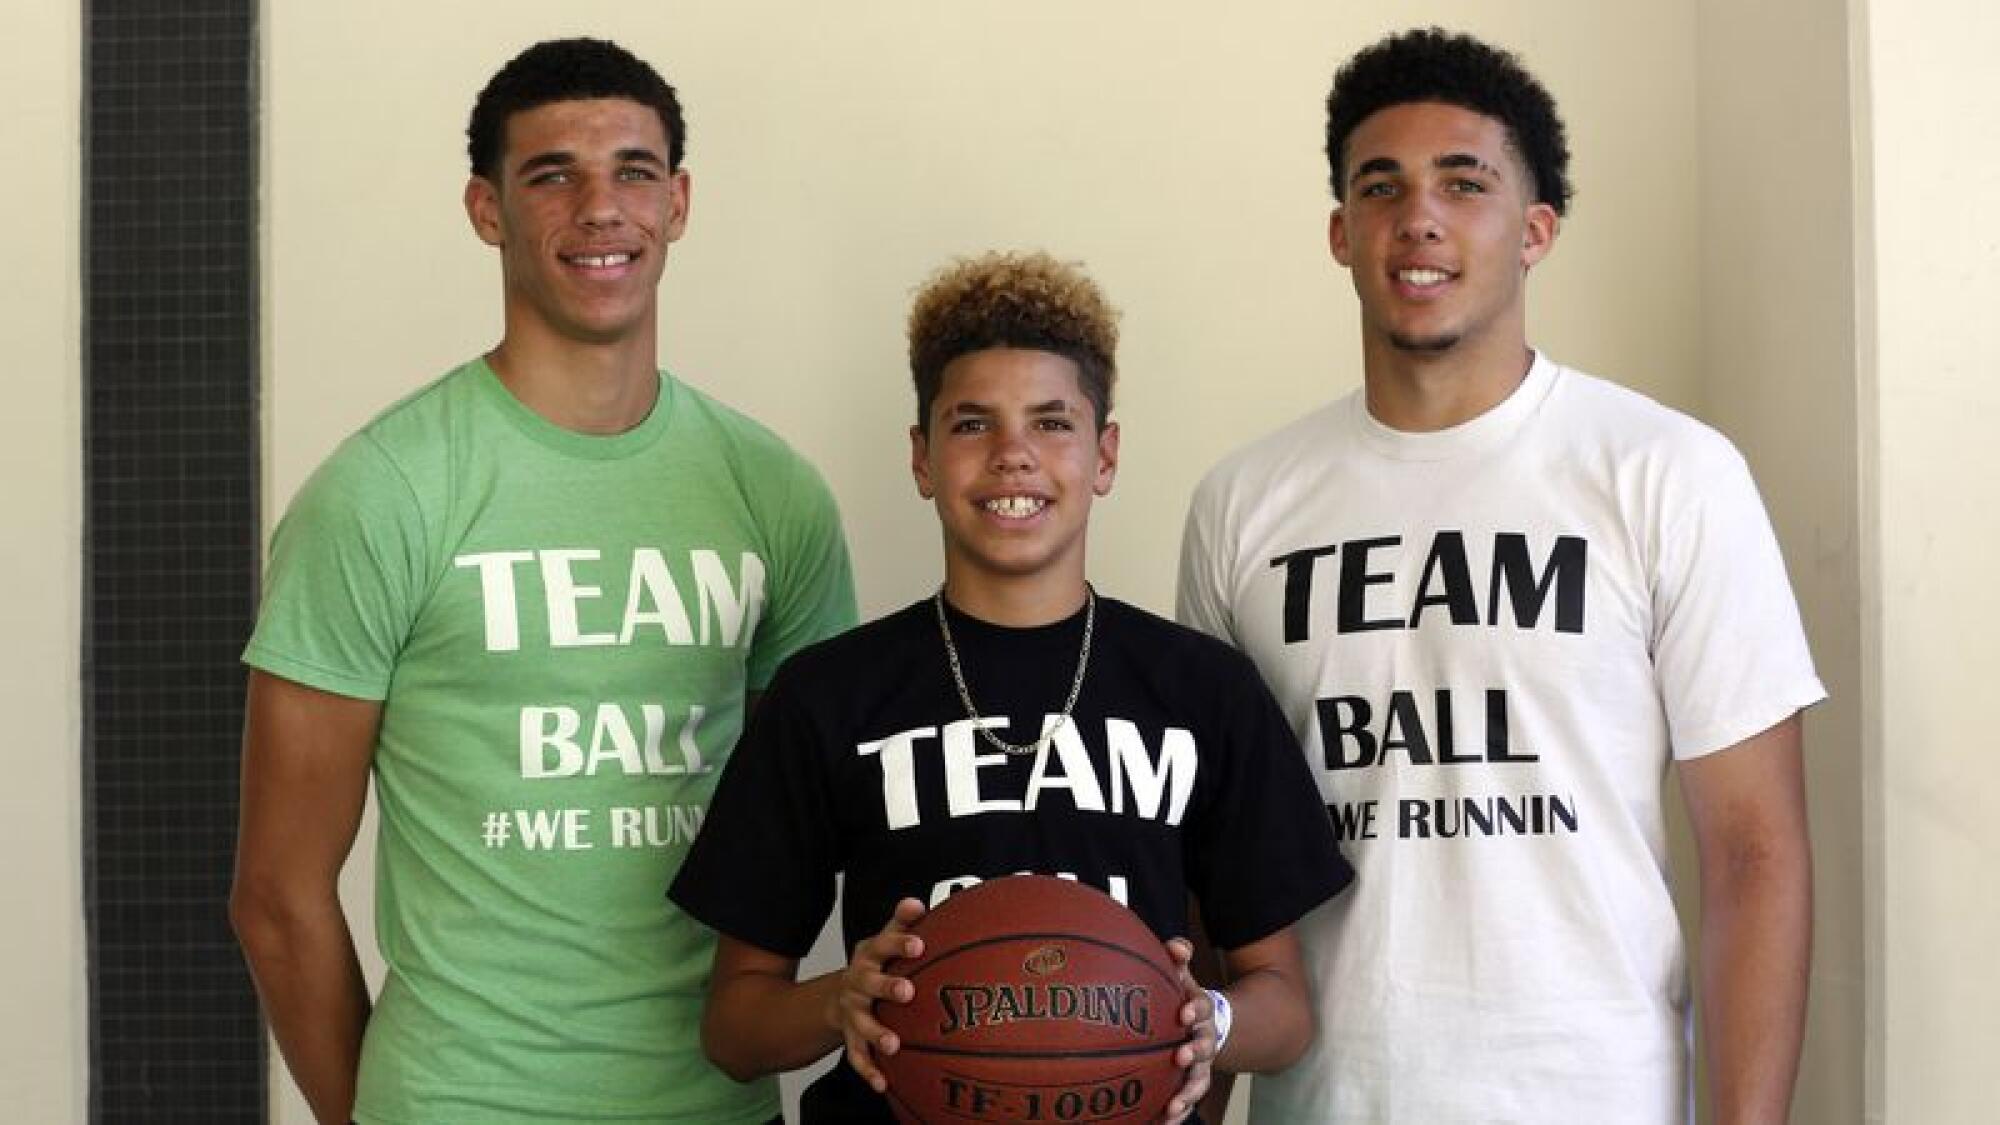 The Ball brothers (from left): Lonzo, LaMelo and LiAngelo before their 2015-16 state championship season.